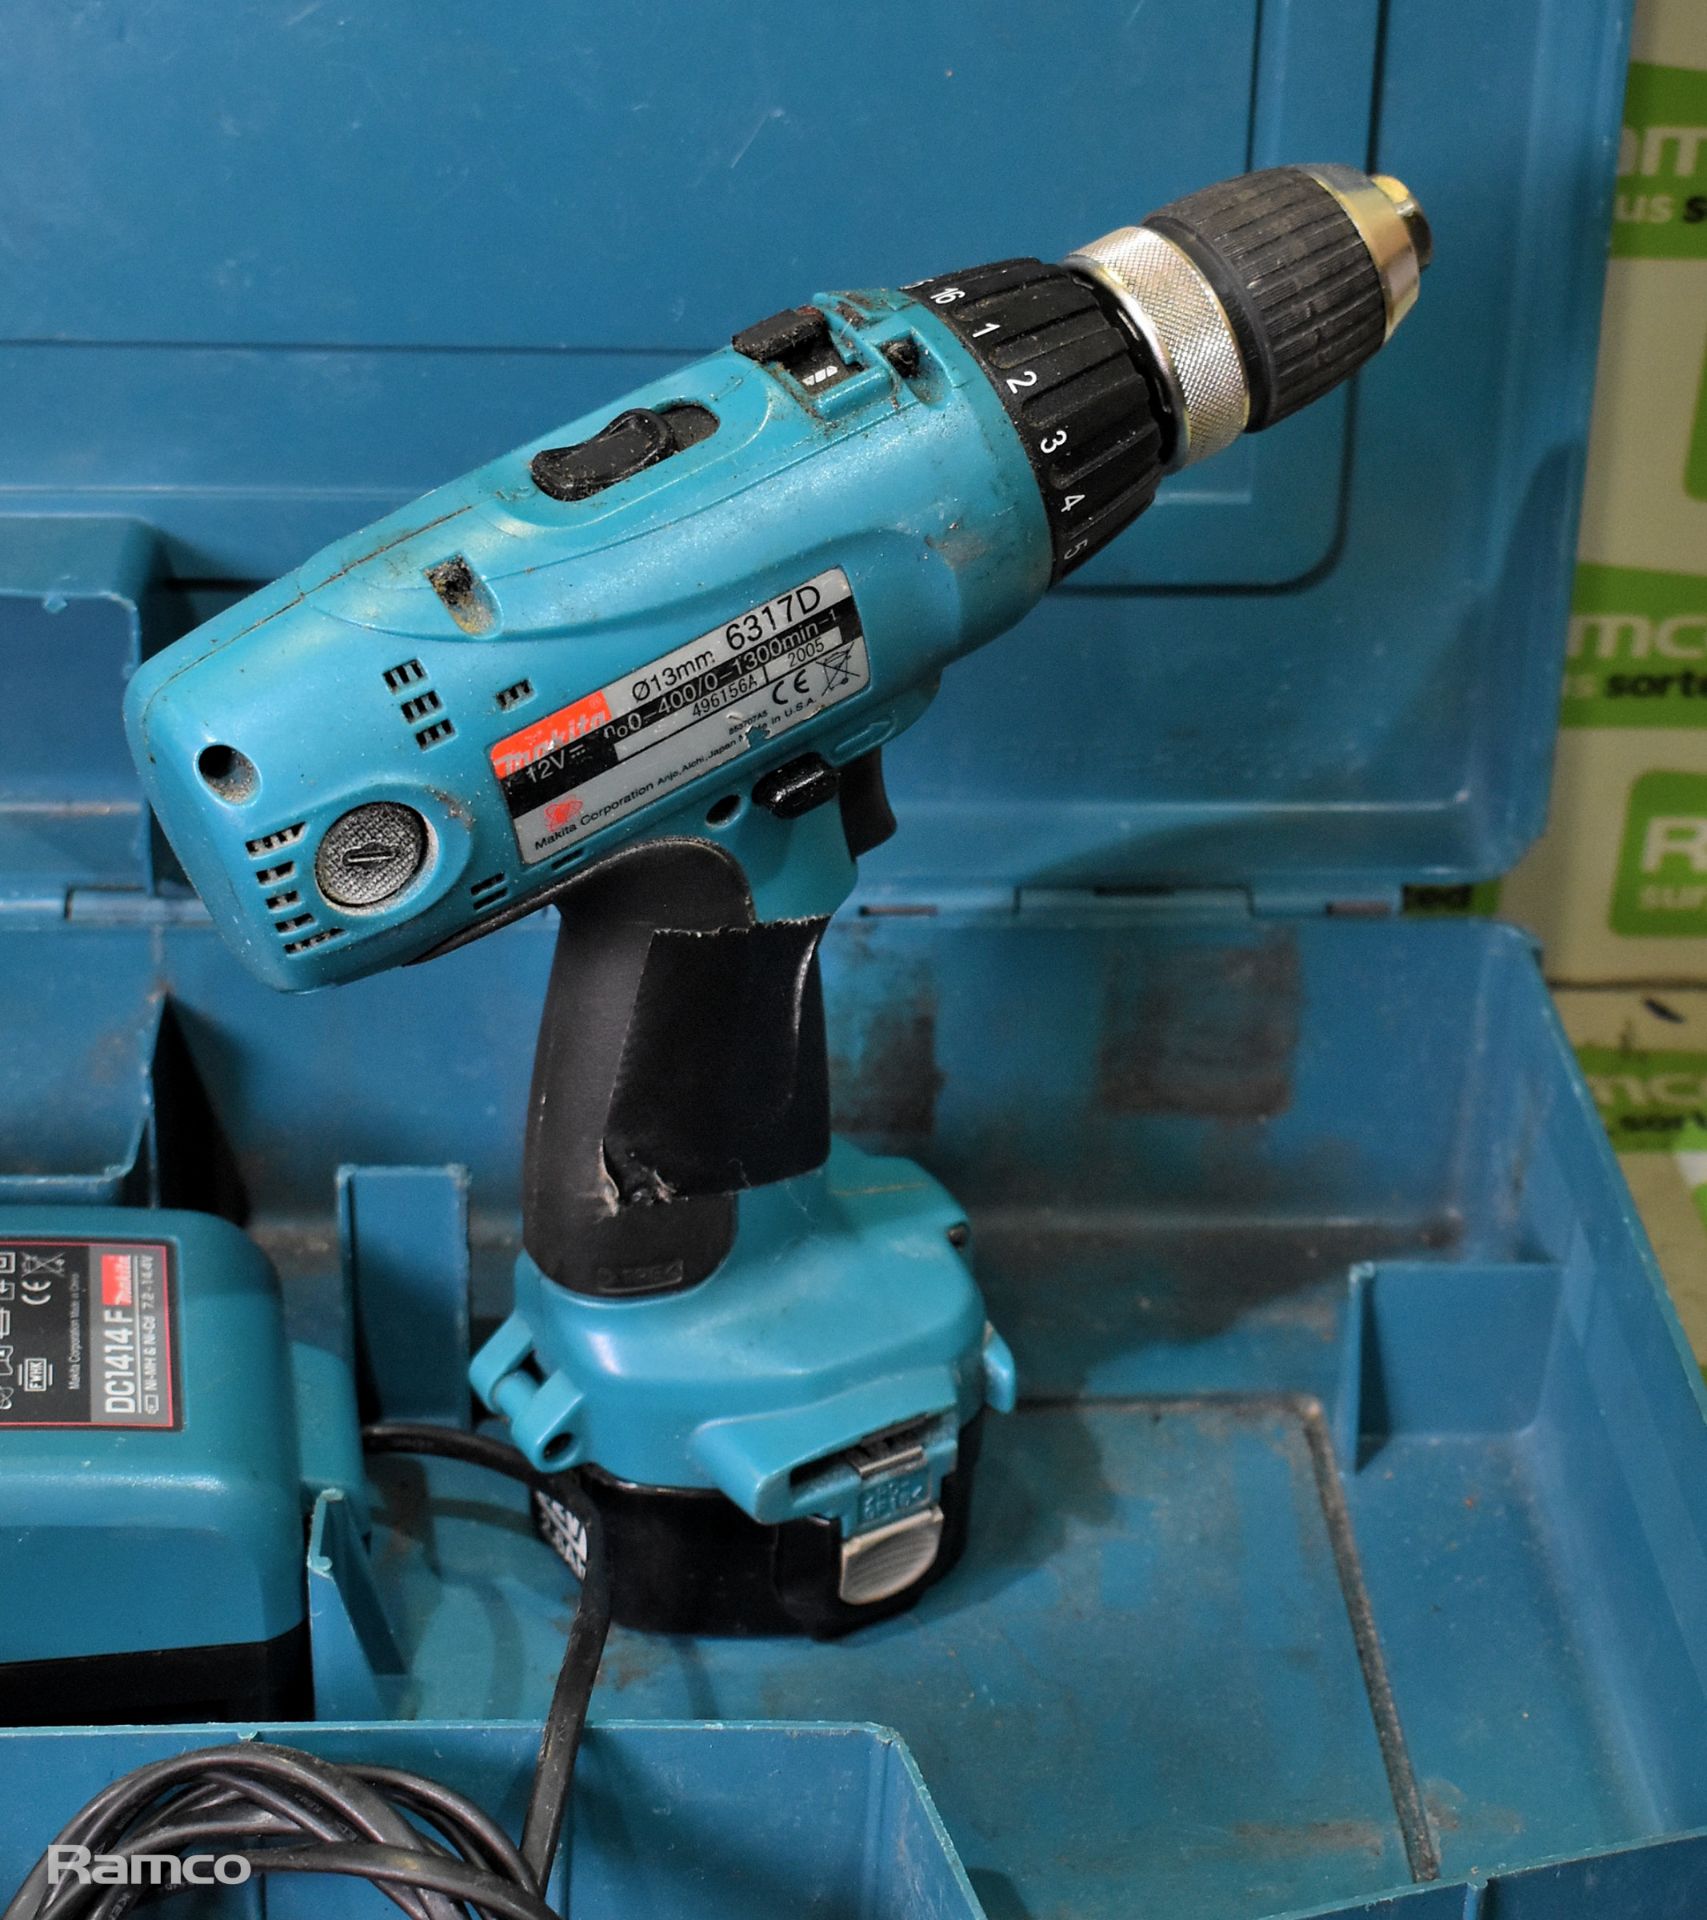 Makita 6317D cordless drill - DC1414F charger - 1x 12V battery - case - Image 3 of 5